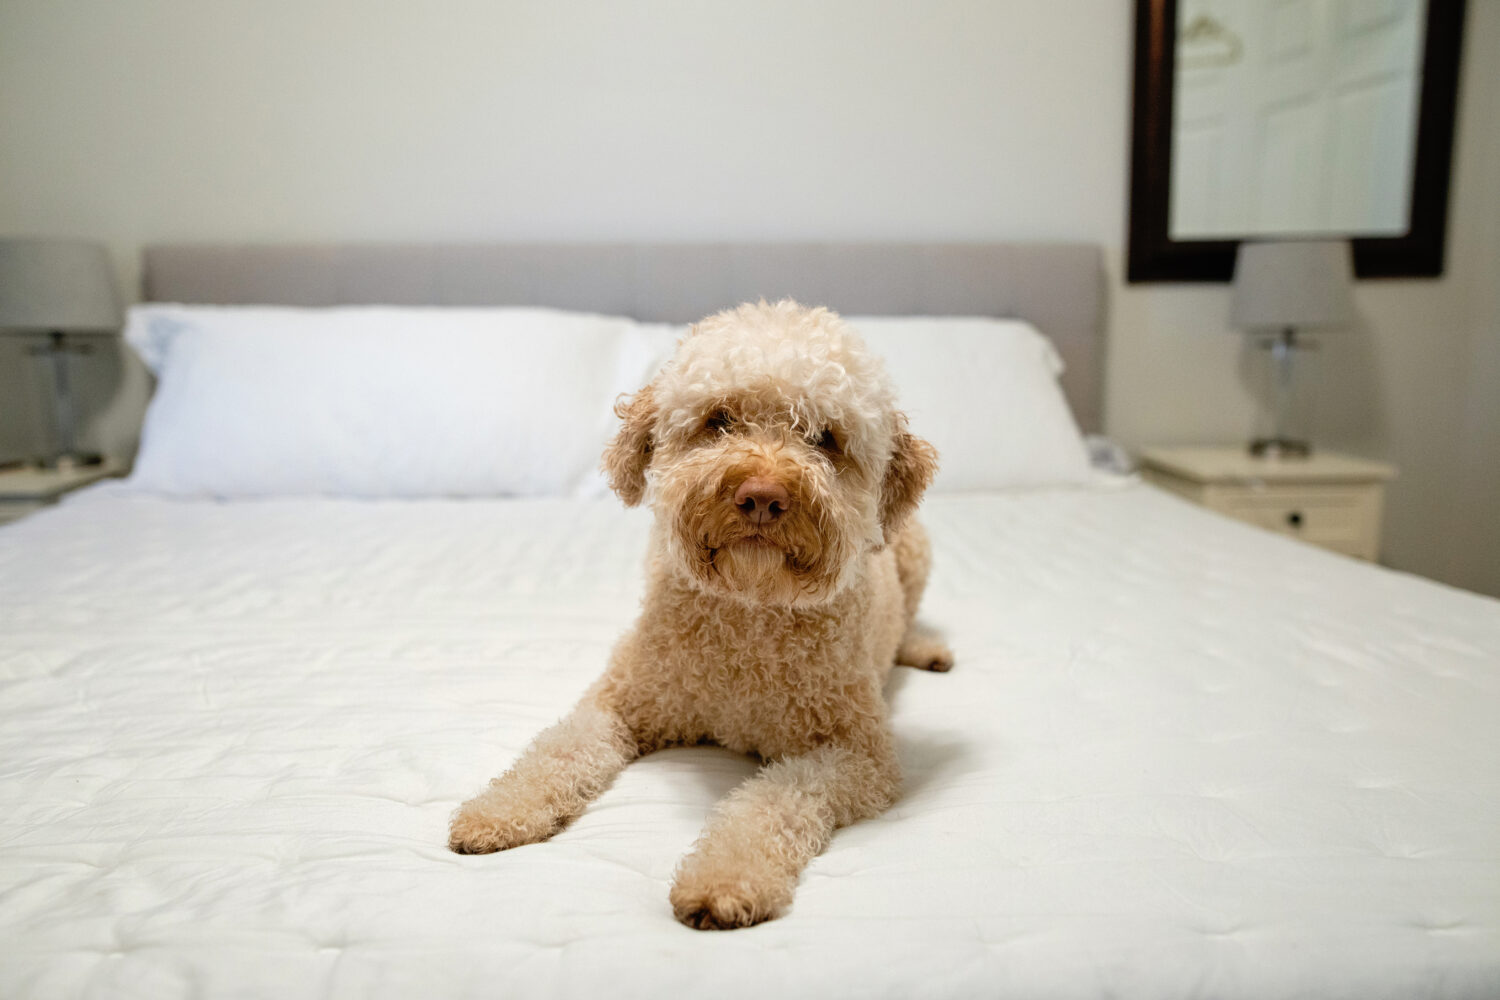 Italian Water dog posing on the bed